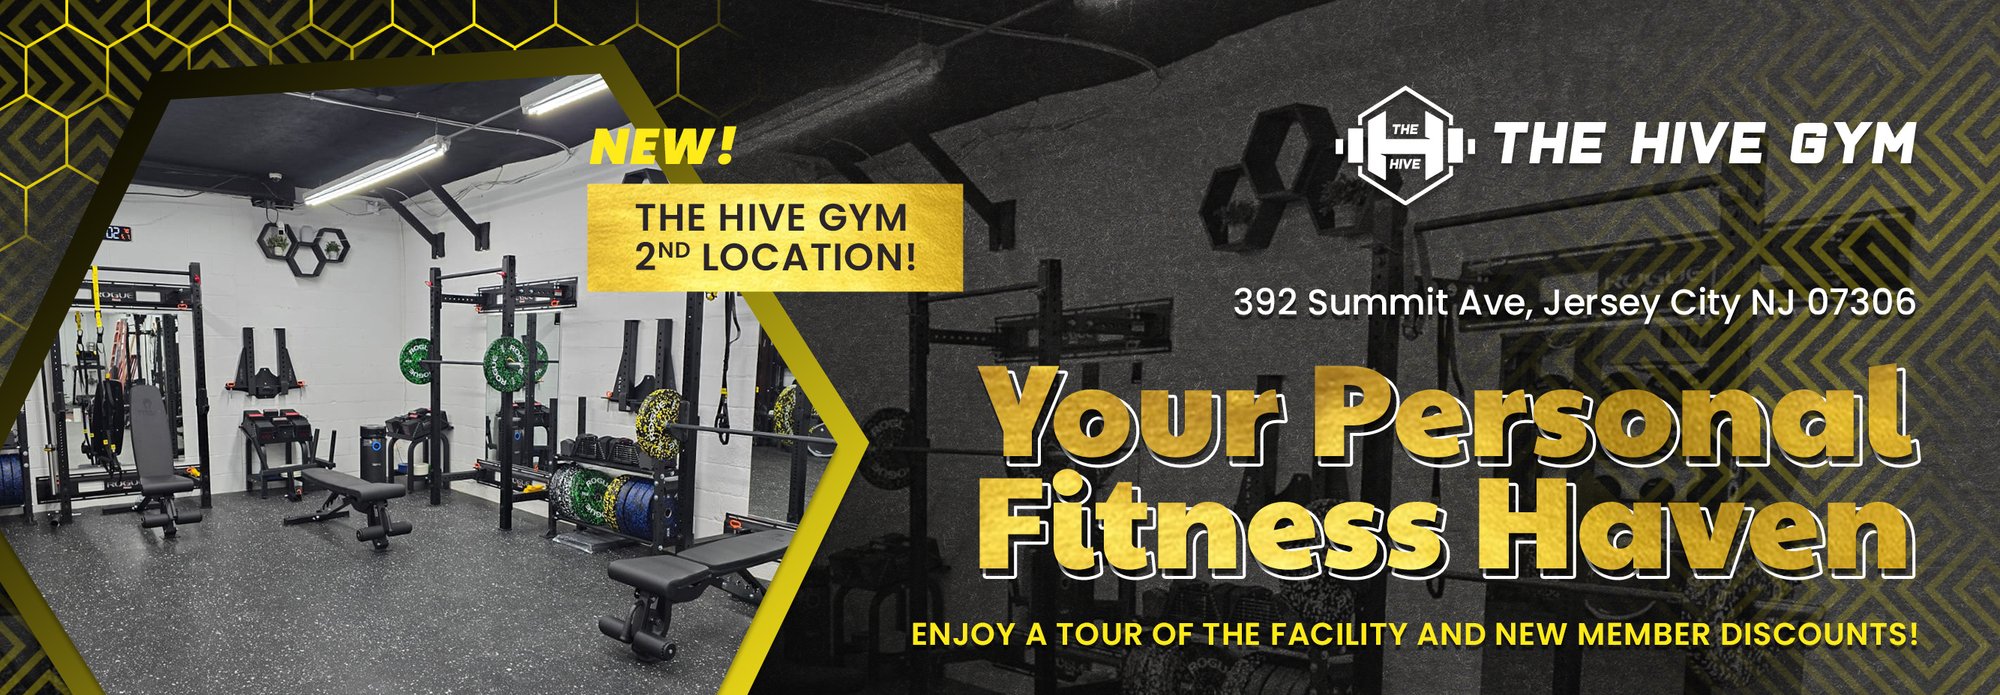 The Hive Gym new location banner 4